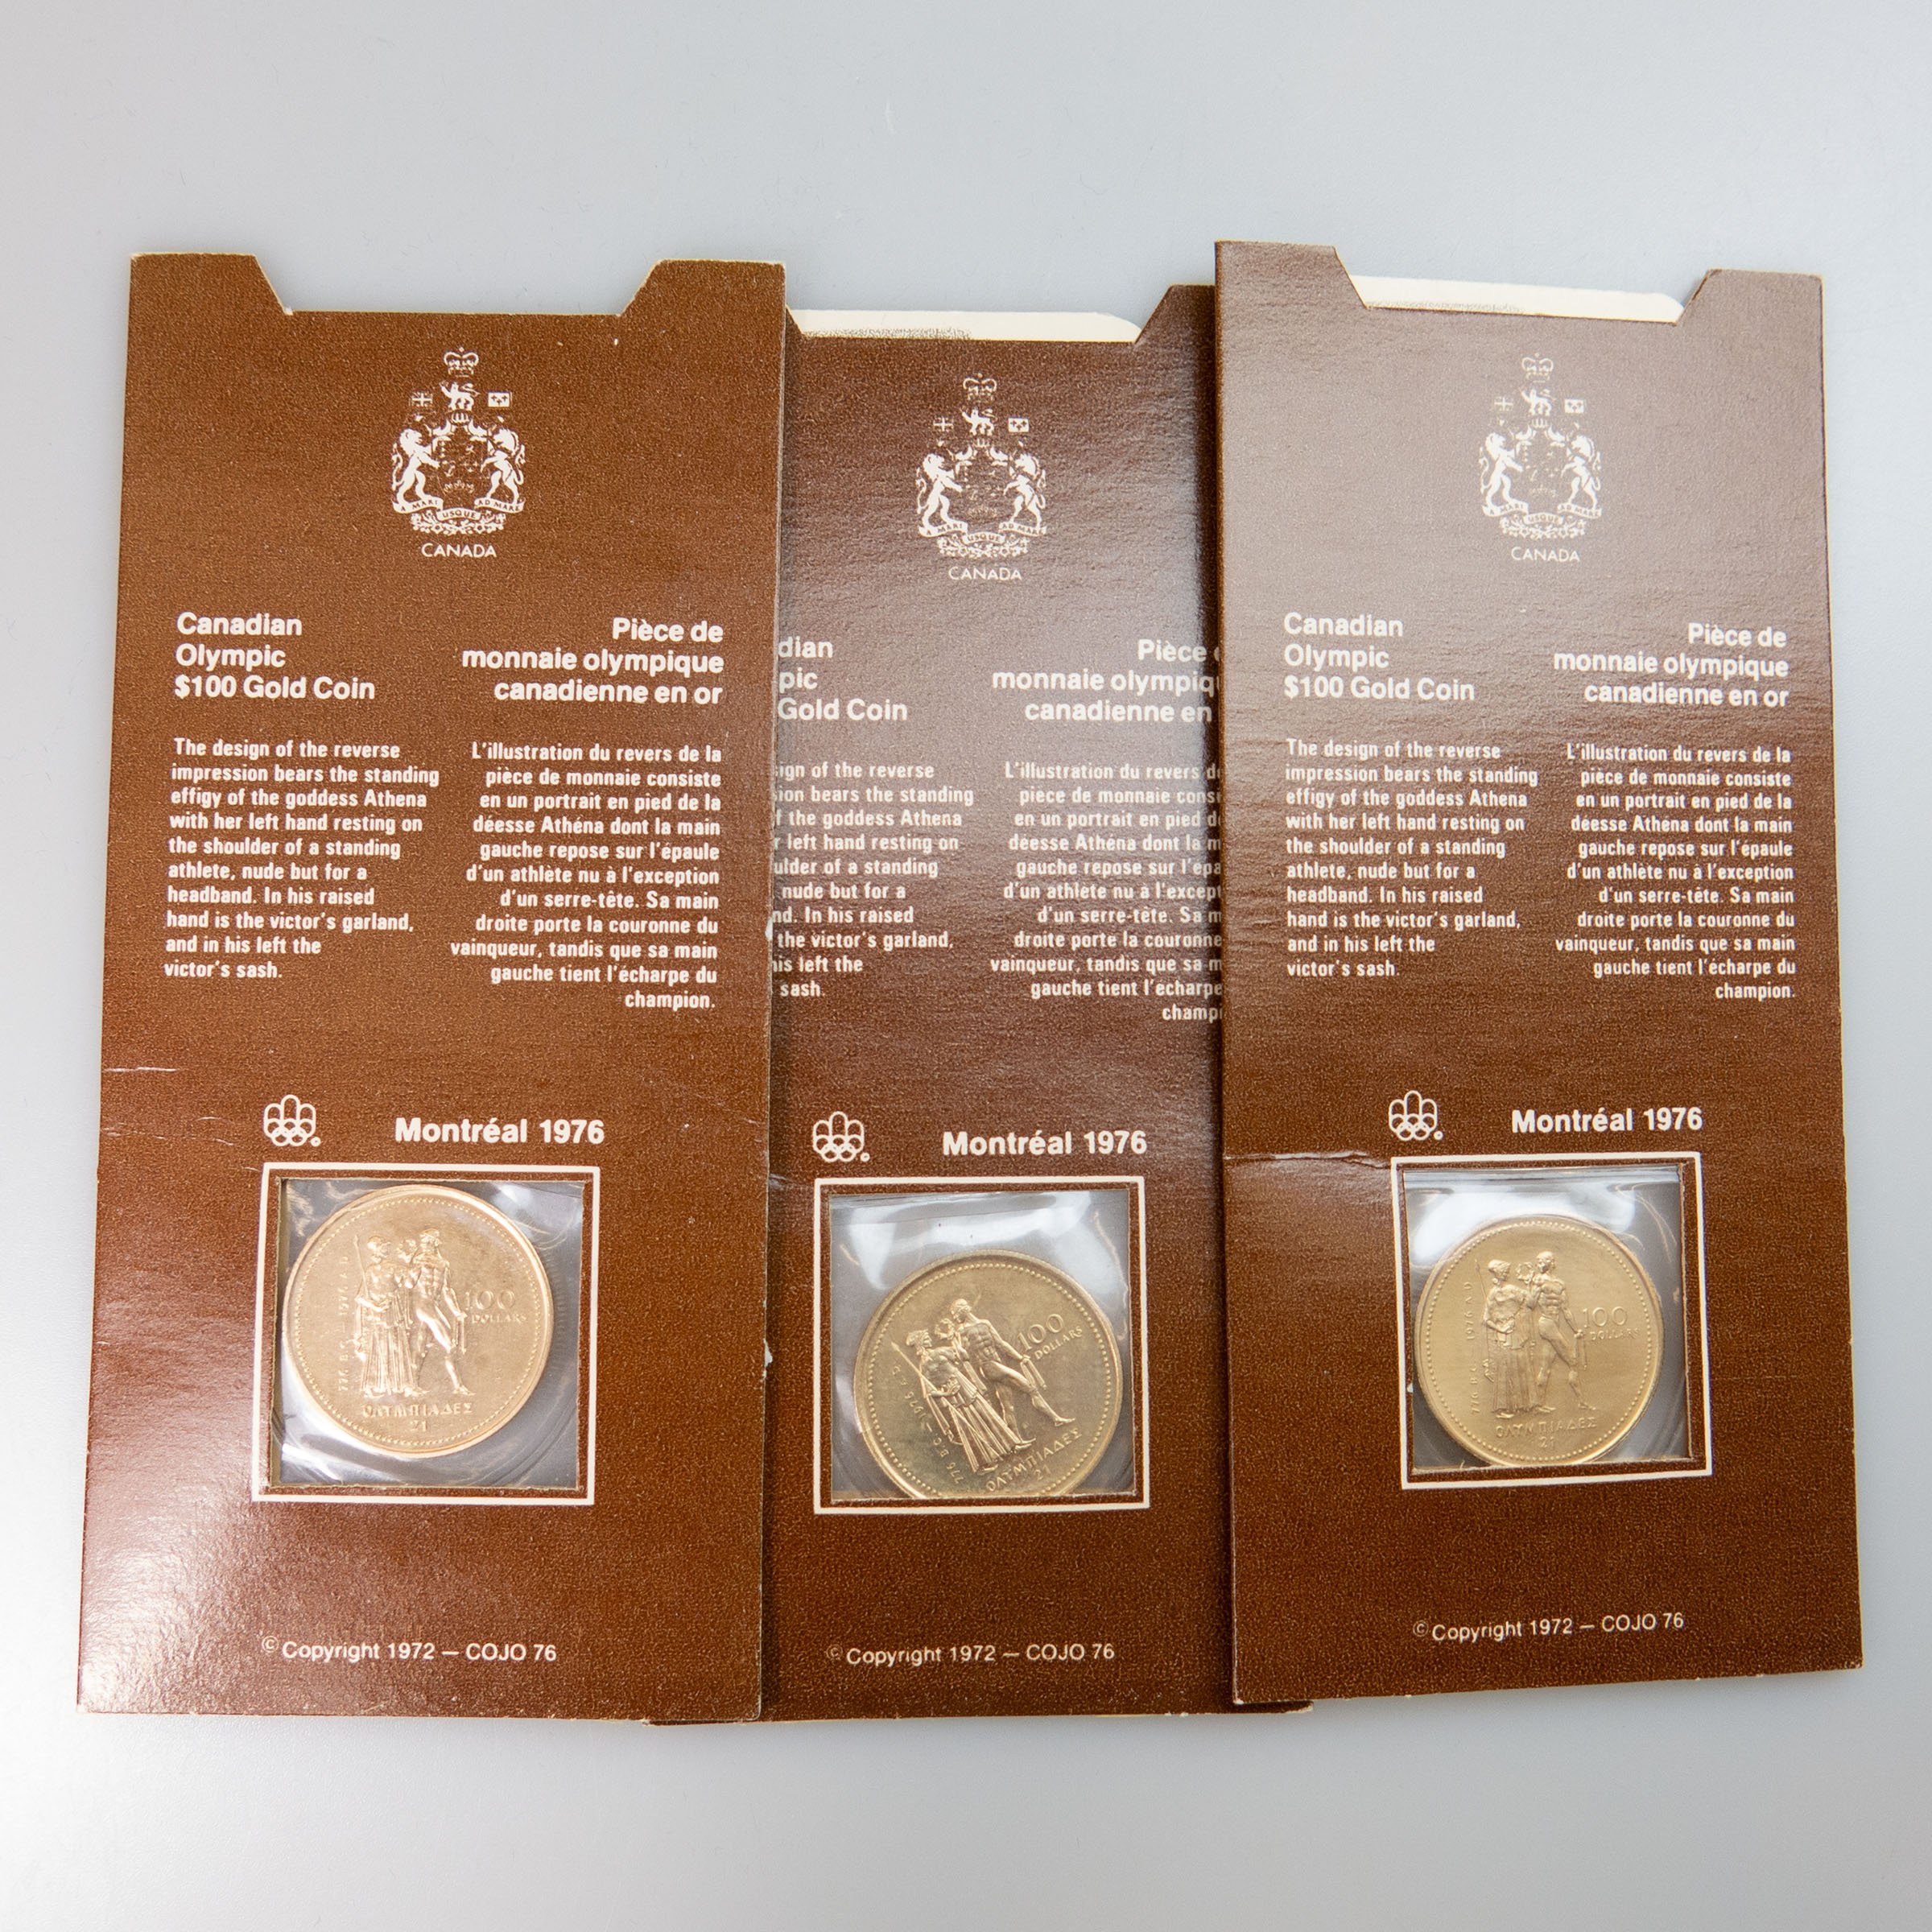 Three Canadian 1976 $100 Gold Coins, 14k version